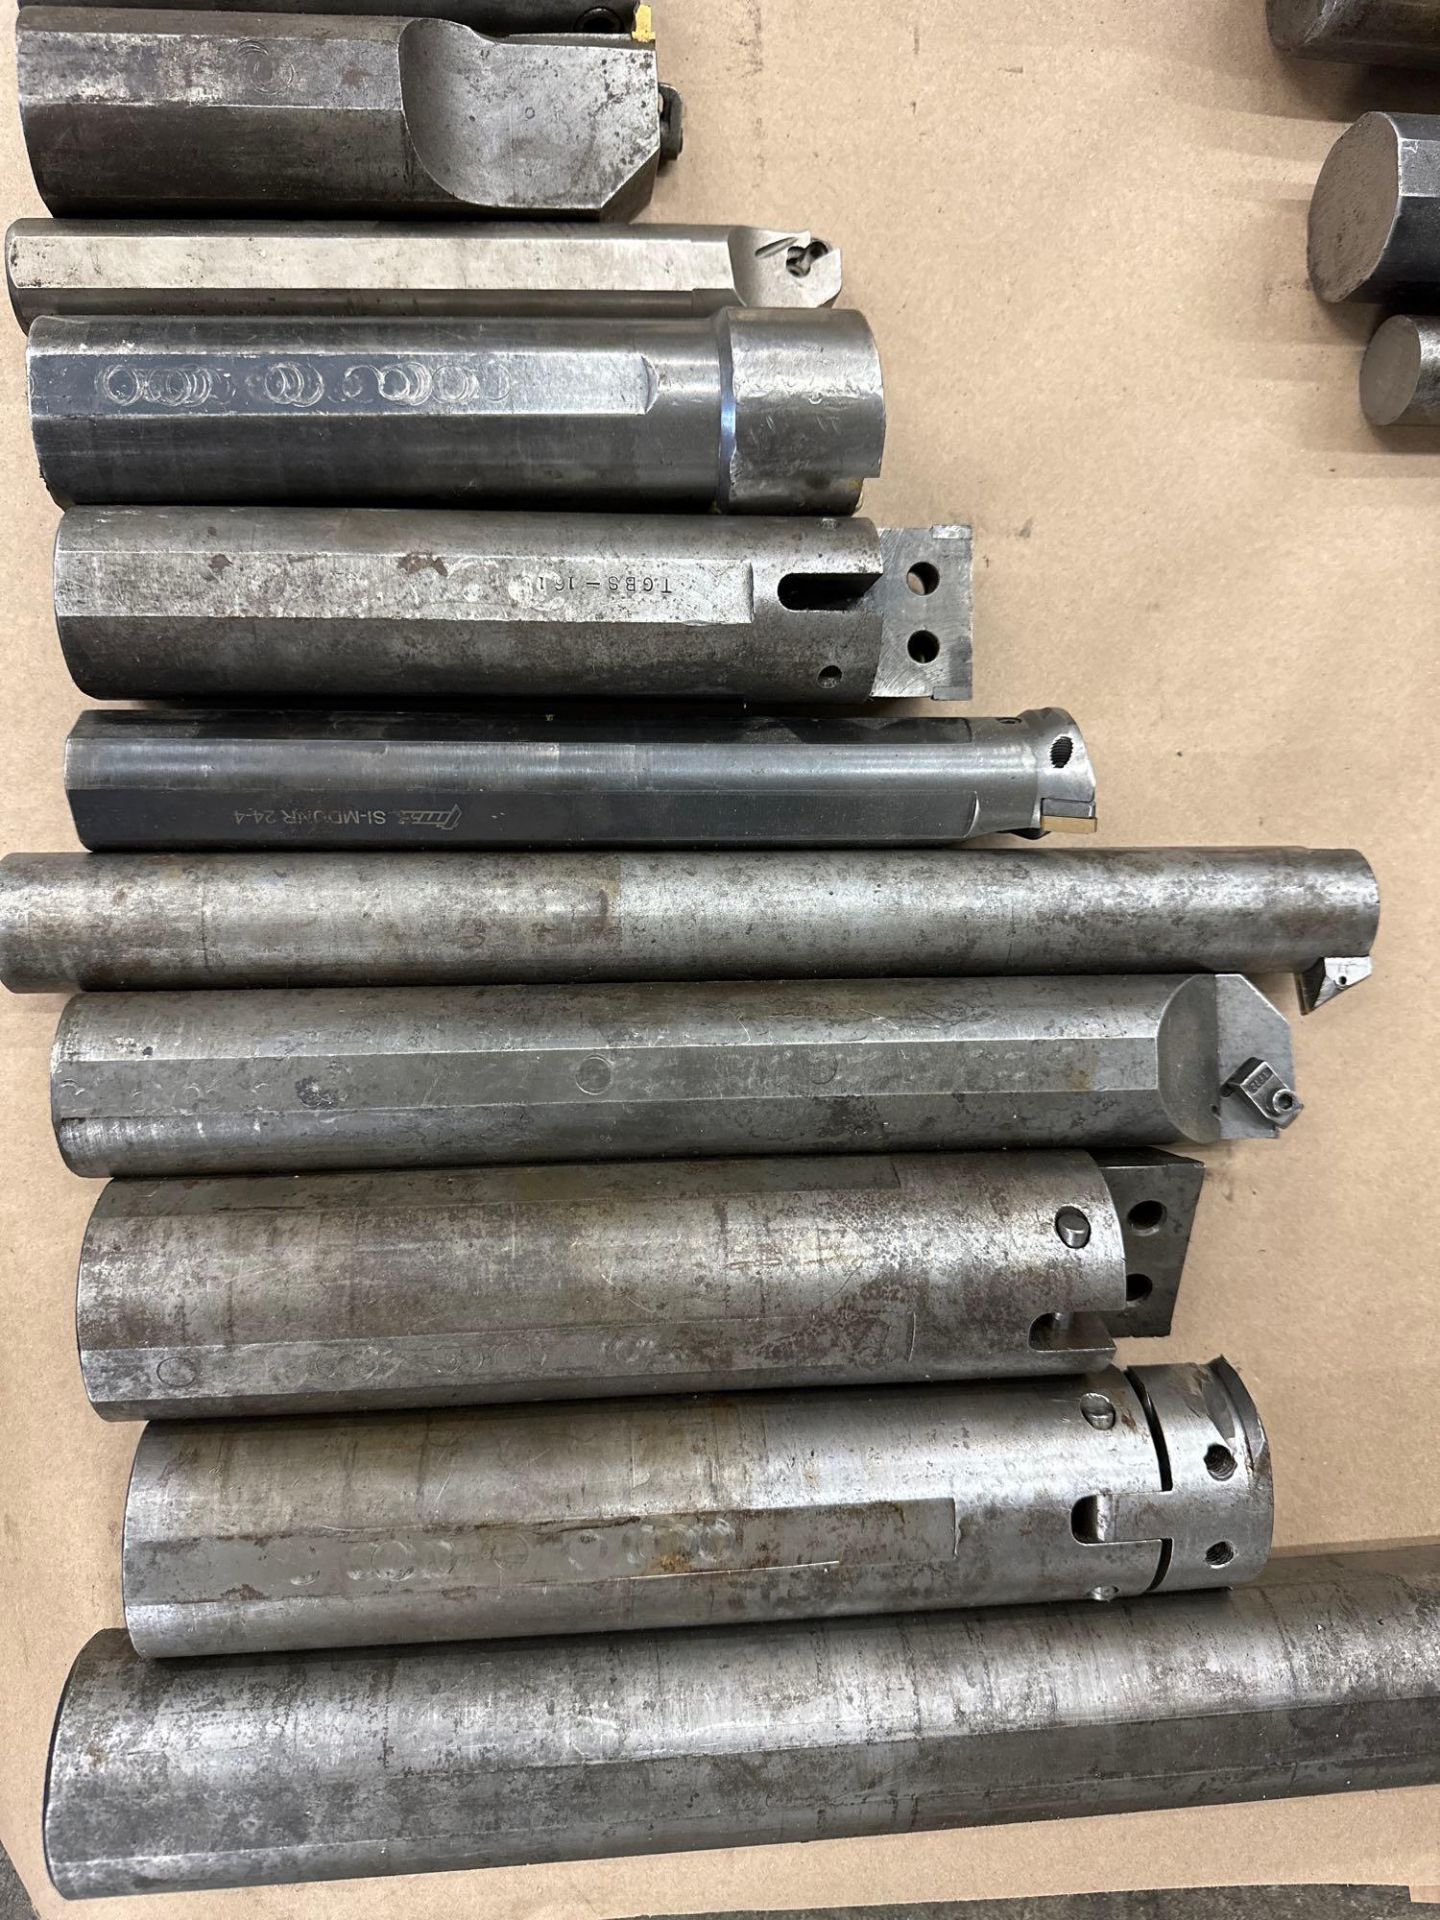 Lot of 10 Assorted Indexable Boring Bars Ranging From: 1” X 5 1/2” To 2 1/2” X 19 3/4” - Image 3 of 6